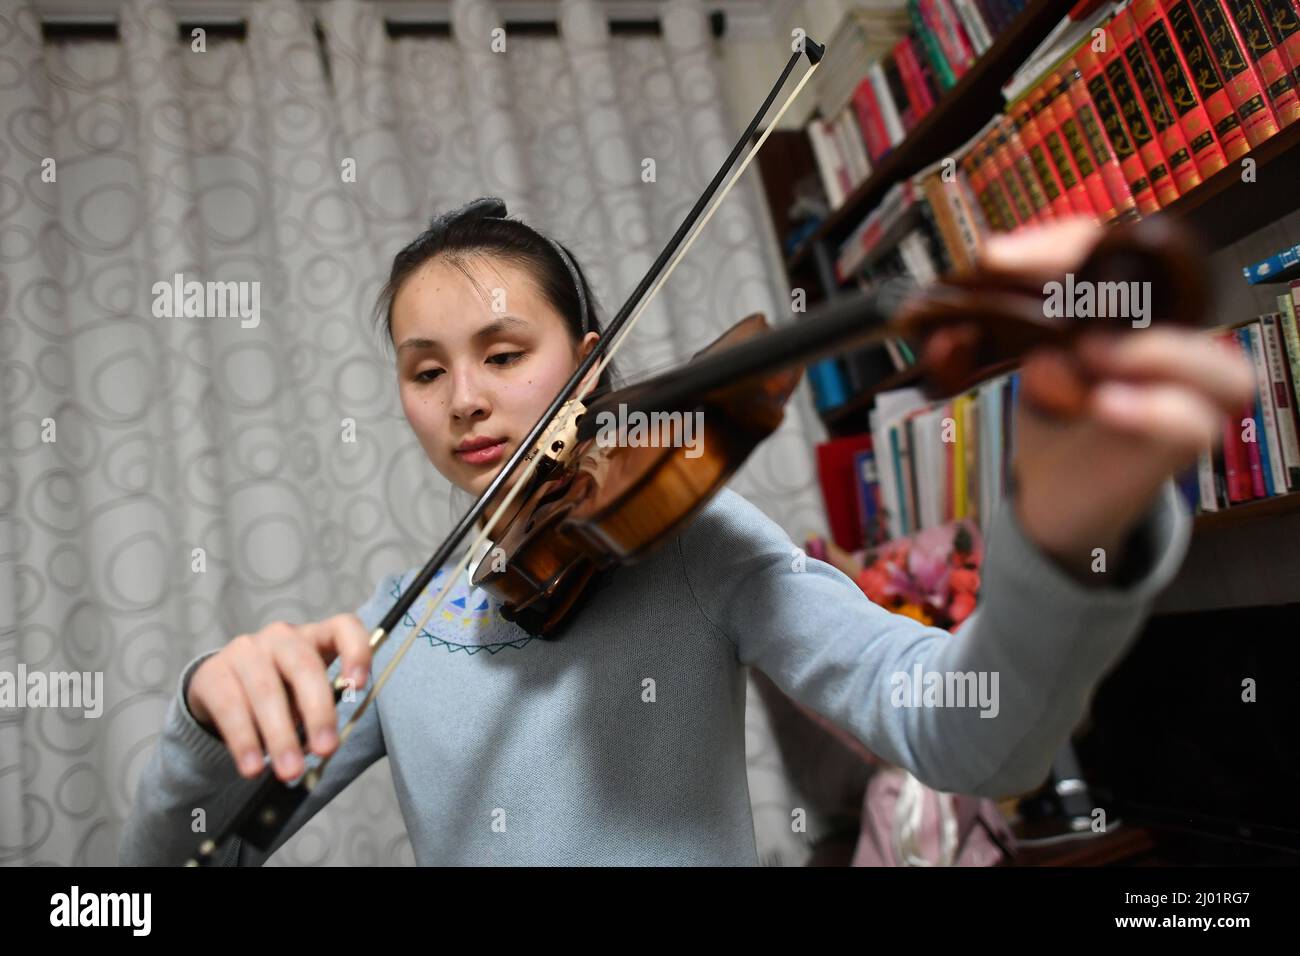 (220316) -- YINCHUAN, March 16, 2022 (Xinhua) -- Ma Yifei plays the Beijing 2022 theme song, Snowflake, on her violin at home in Yinchuan, northwest China's Ningxia Hui Autonomous Region, March 14, 2022. For Ma Yifei, a 16-year-old visually impaired girl, the violin piece of the Beijing 2022 theme song, Snowflake, that she played in the closing ceremony of the Beijing 2022 Paralympic Winter Games, is her best gift for Paralympians across the globe. Ma, a sophomore in Ningxia Special Education High School in northwest China's Ningxia Hui Autonomous Region, lost her eyesight at the age of two Stock Photo